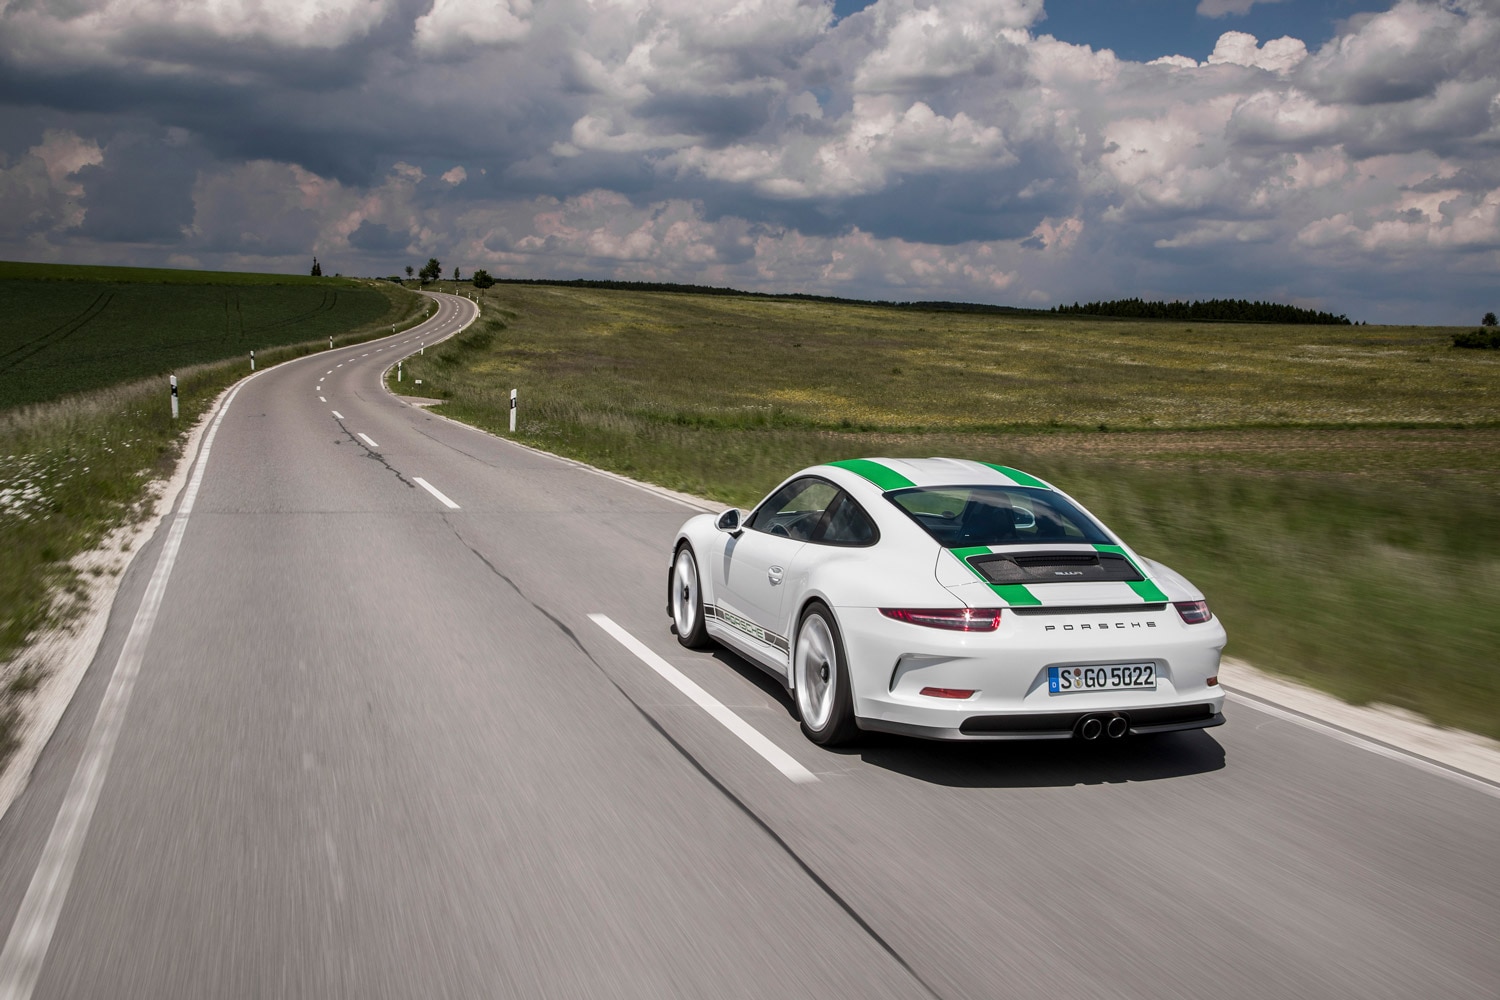 2016 Porsche 911 R driving on a country road